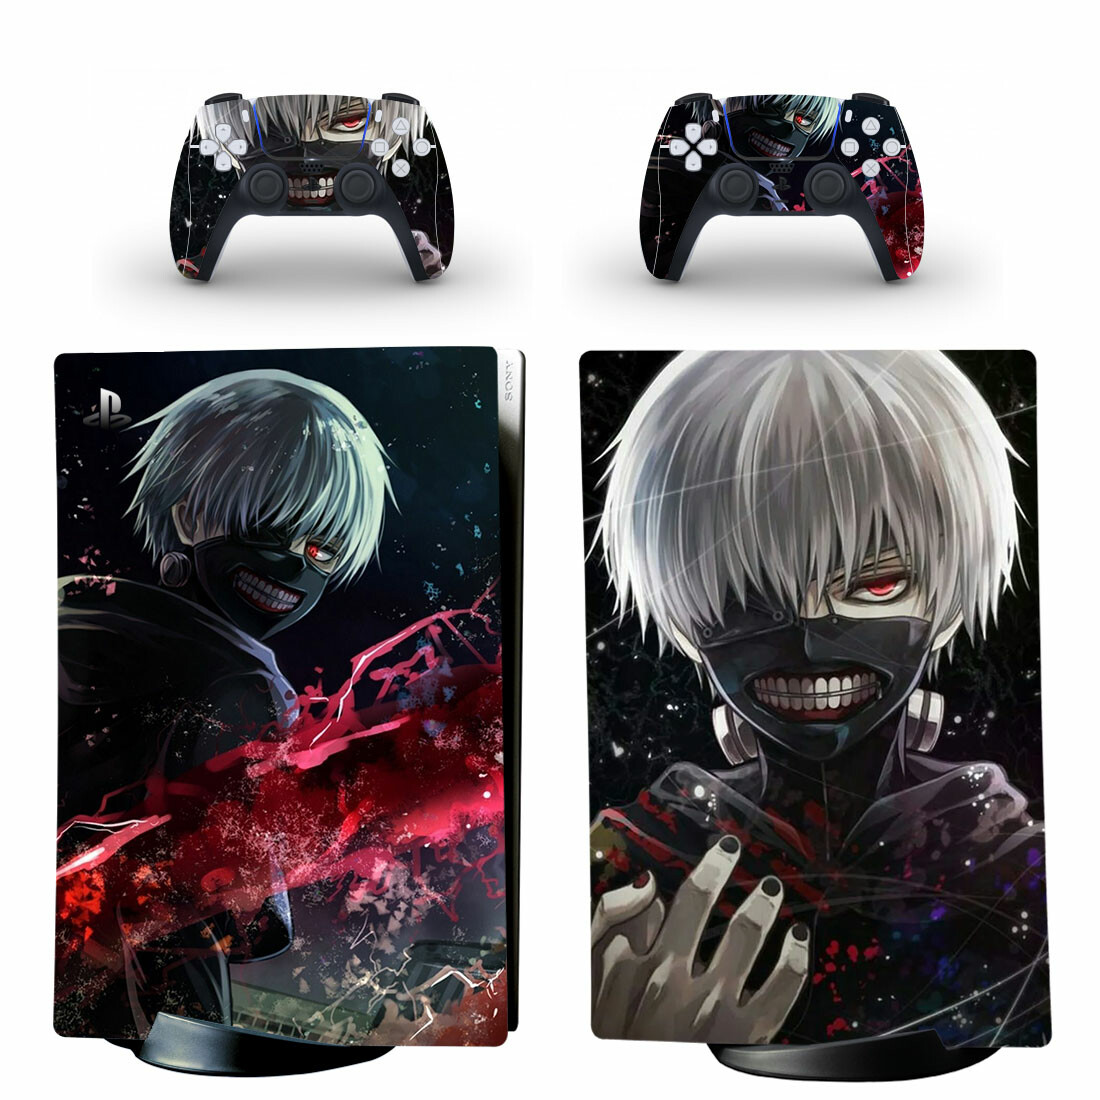 Tokyo Ghoul Skin Sticker Decal For PS5 Digital Edition Design 1